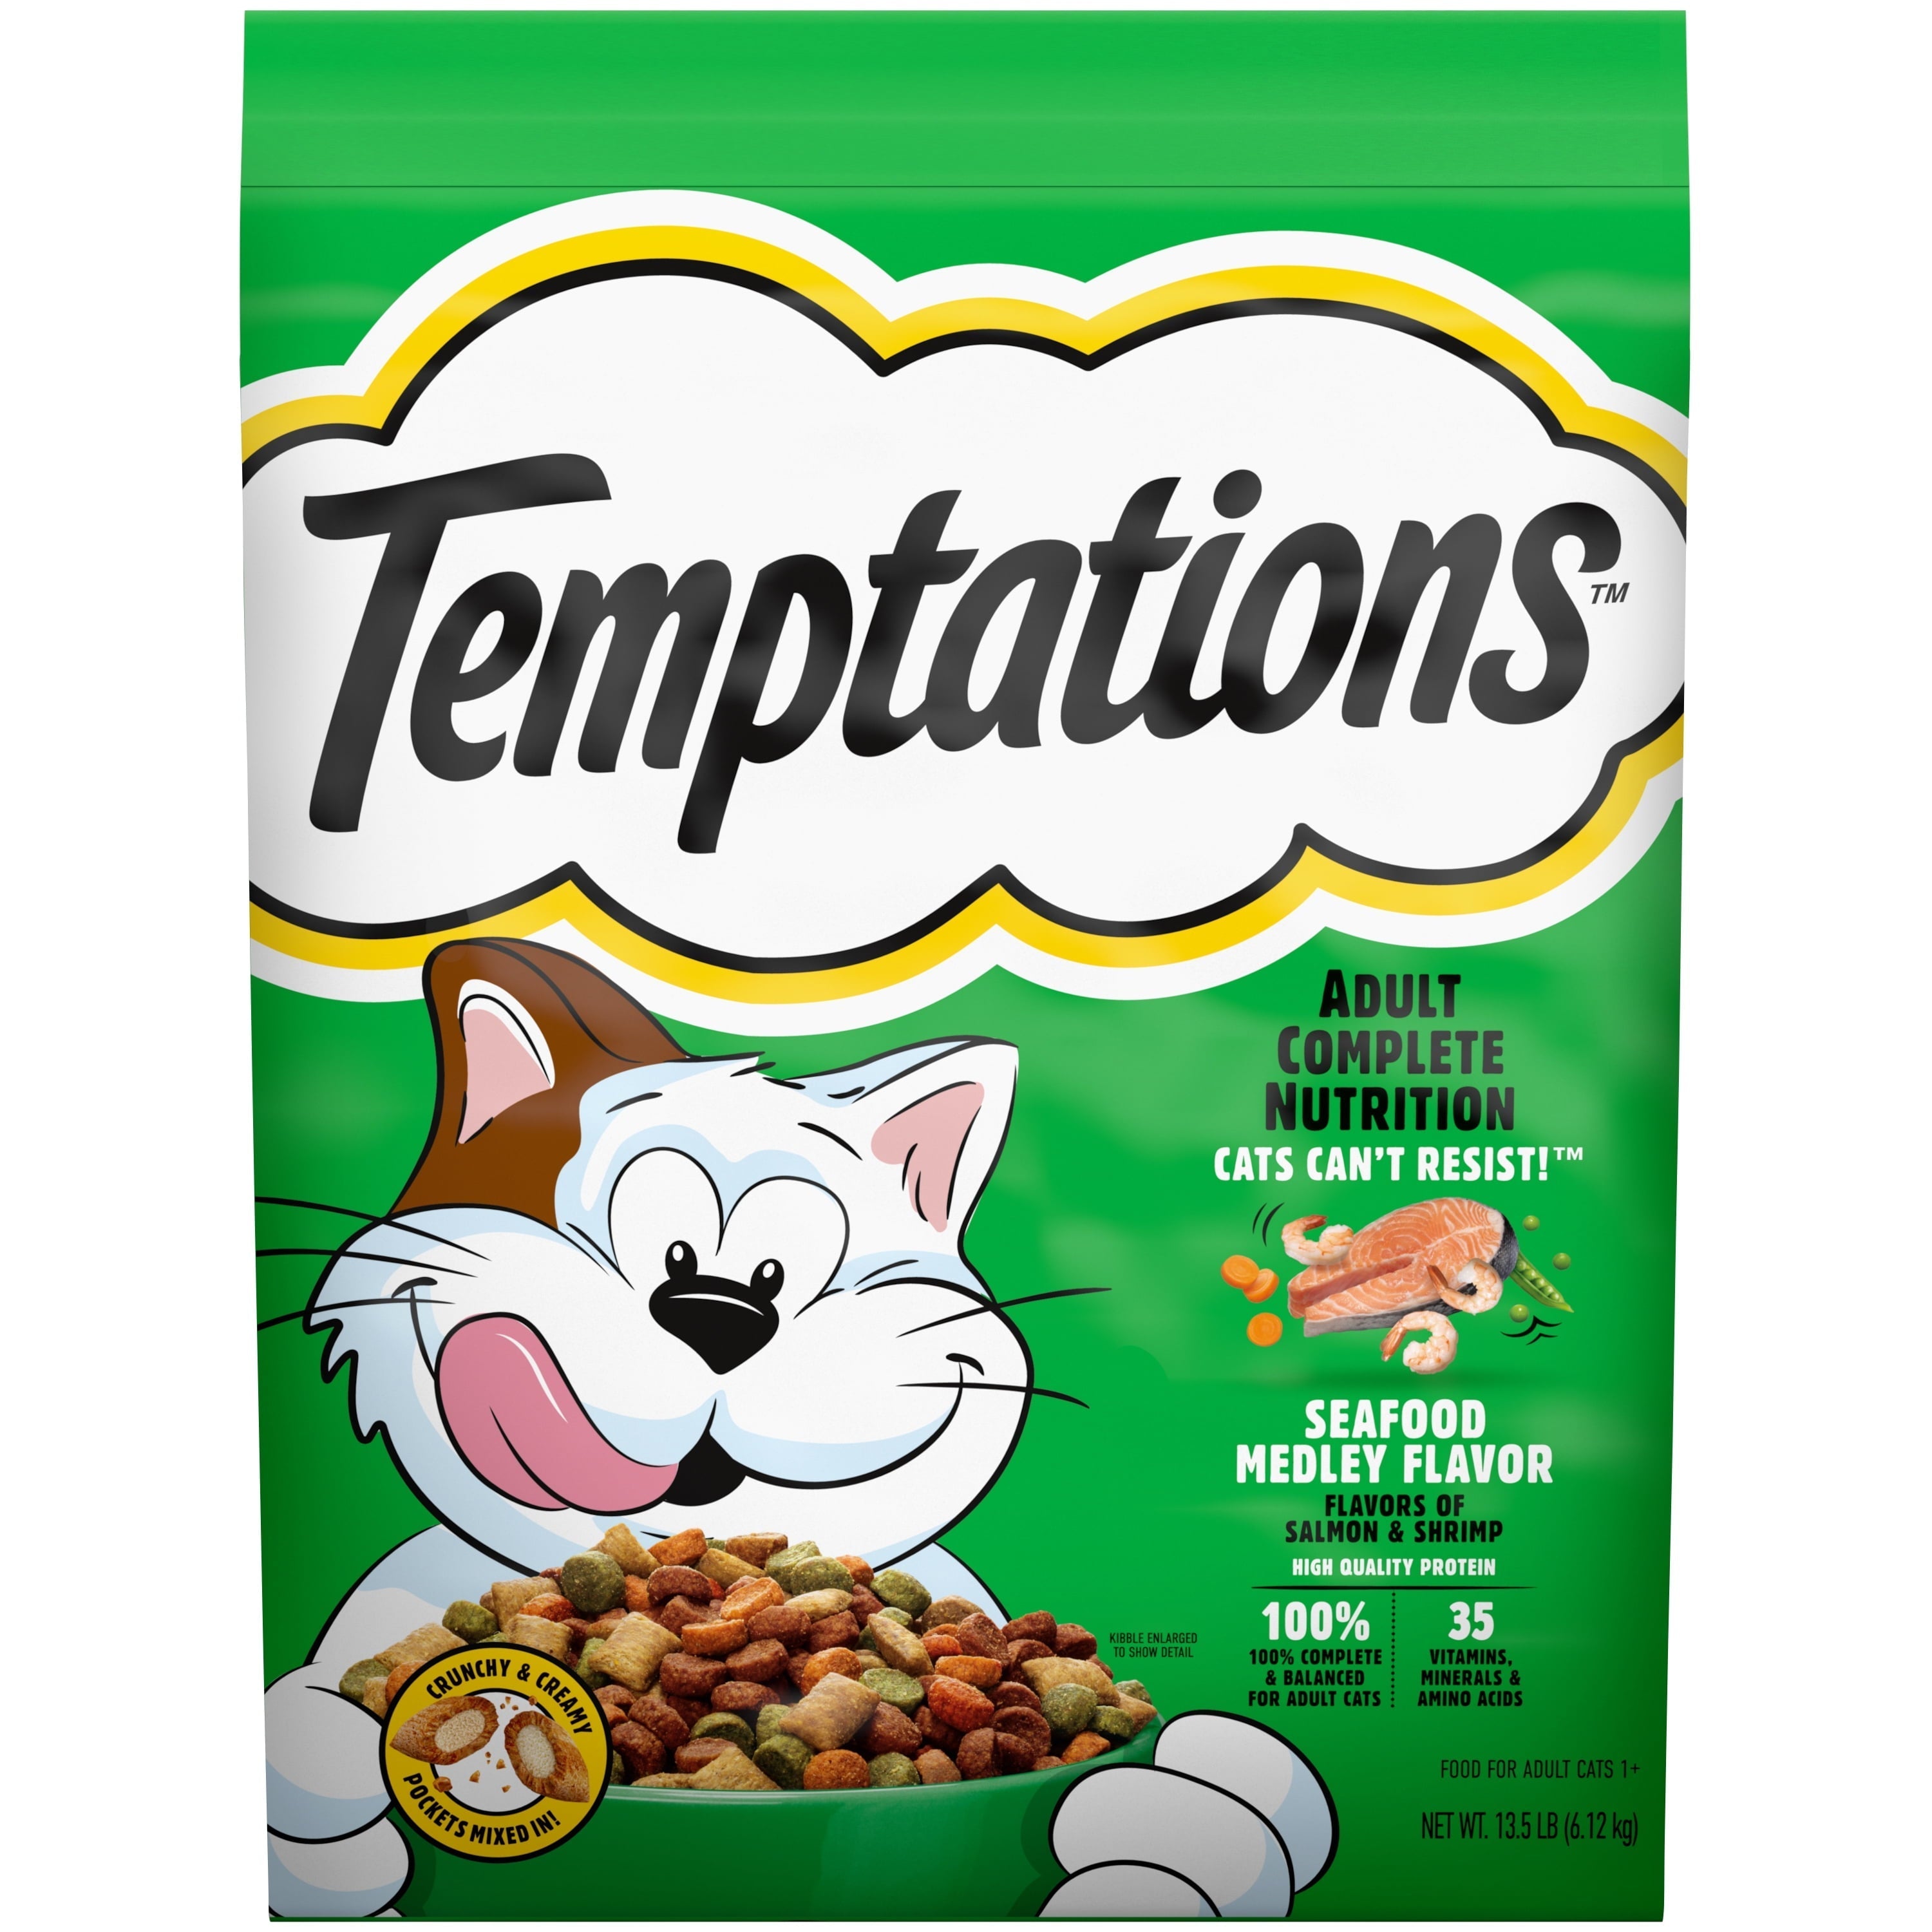 Wholesale prices with free shipping all over United States TEMPTATIONS Seafood Medley Flavor Adult Dry Cat Food, 13.5 lb. Bag, Walmart Exclusive - Steven Deals